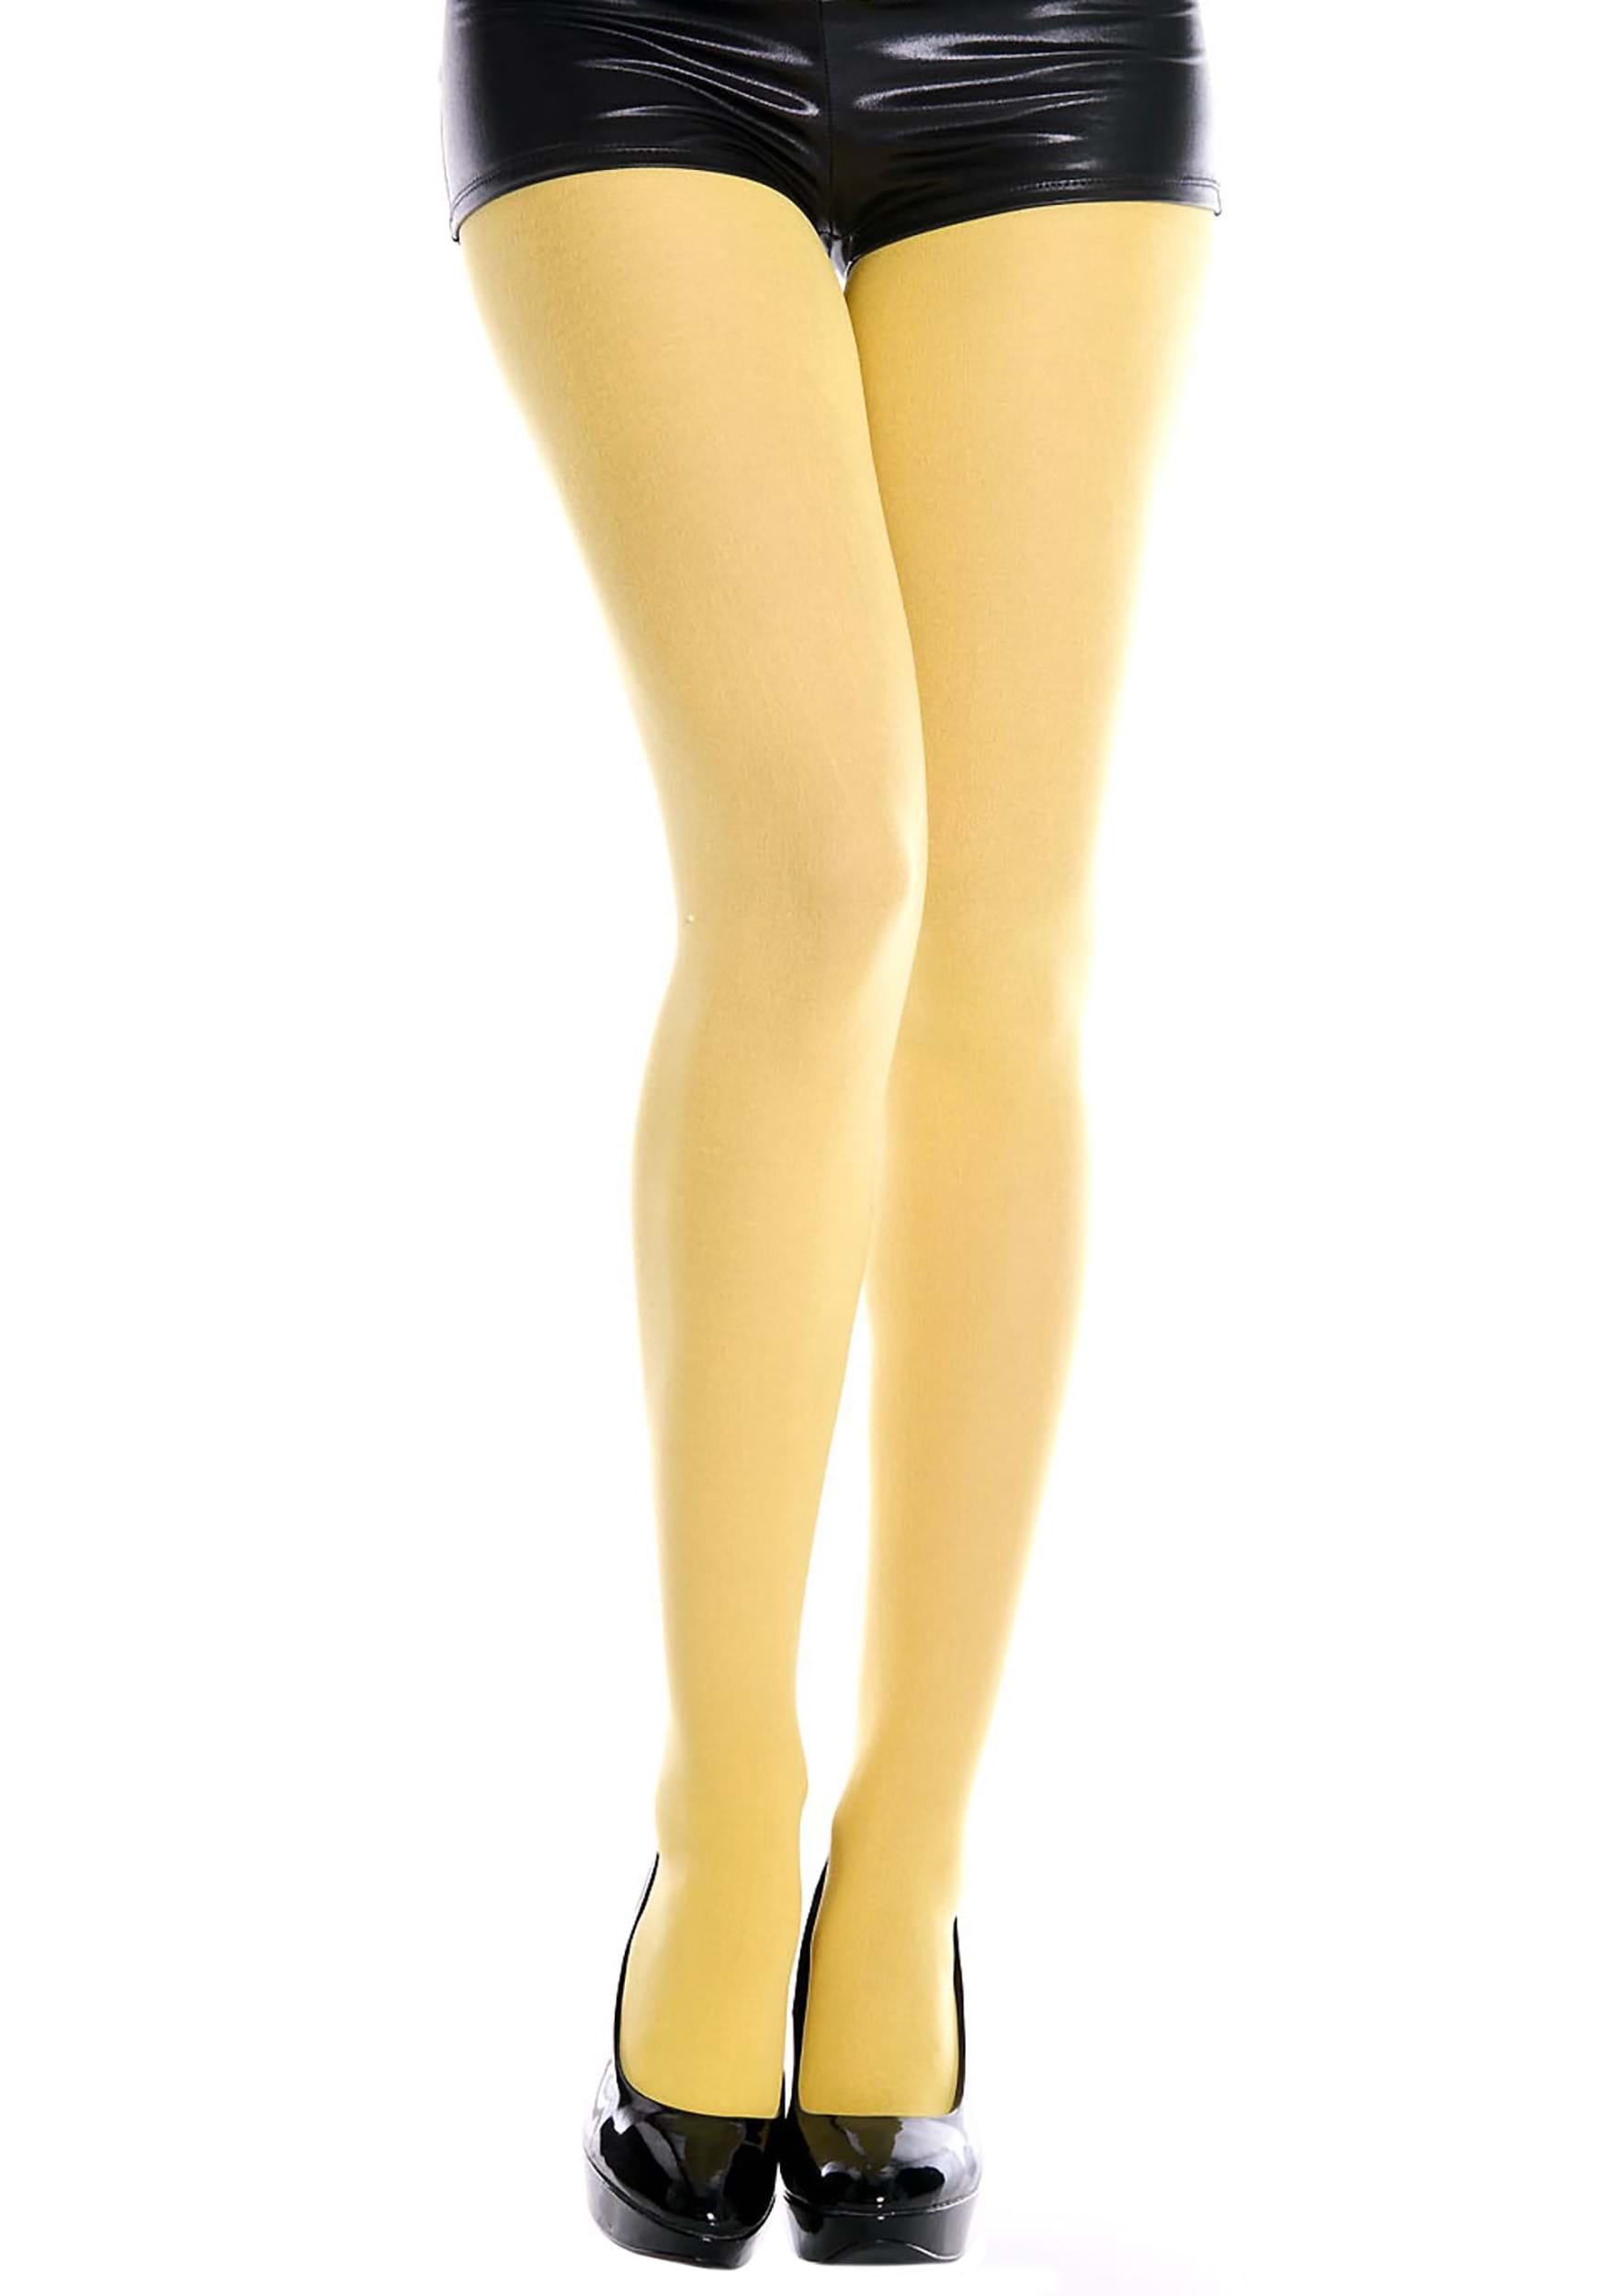 https://images.halloweencostumes.com/products/93438/1-1/womens-yellow-opaque-tights.jpg